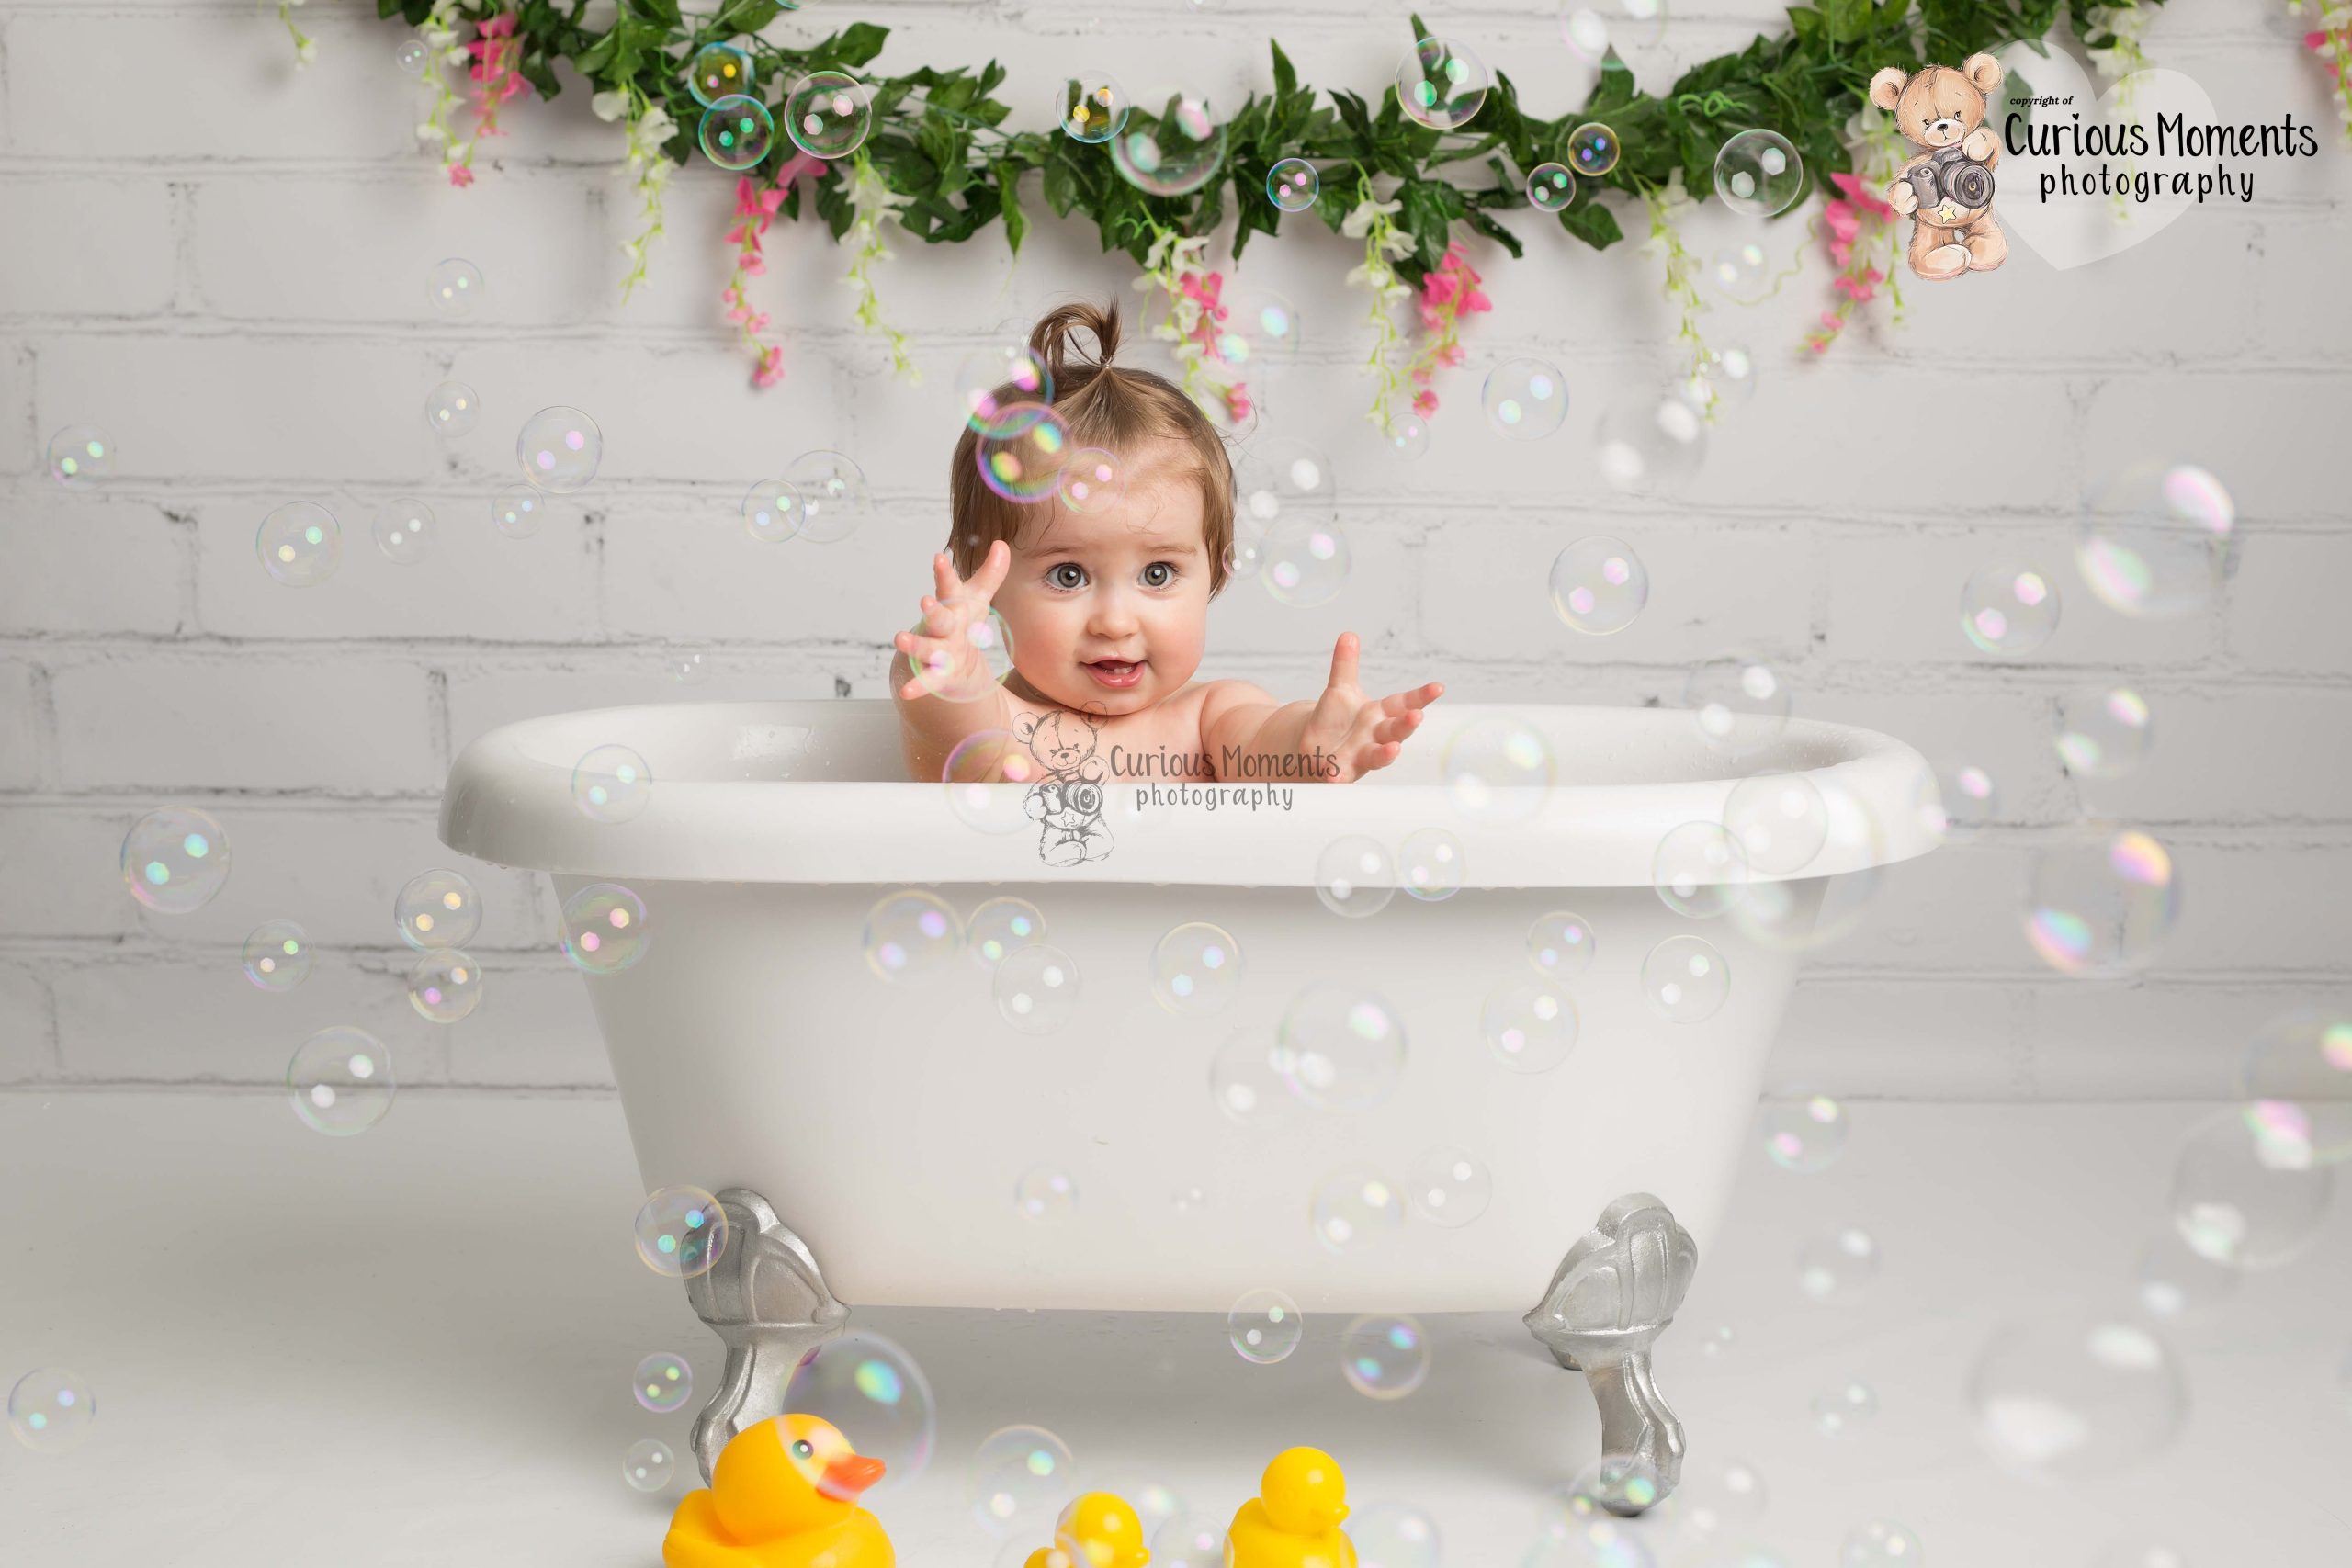 Baby girl in bath Tub playing with bubbles